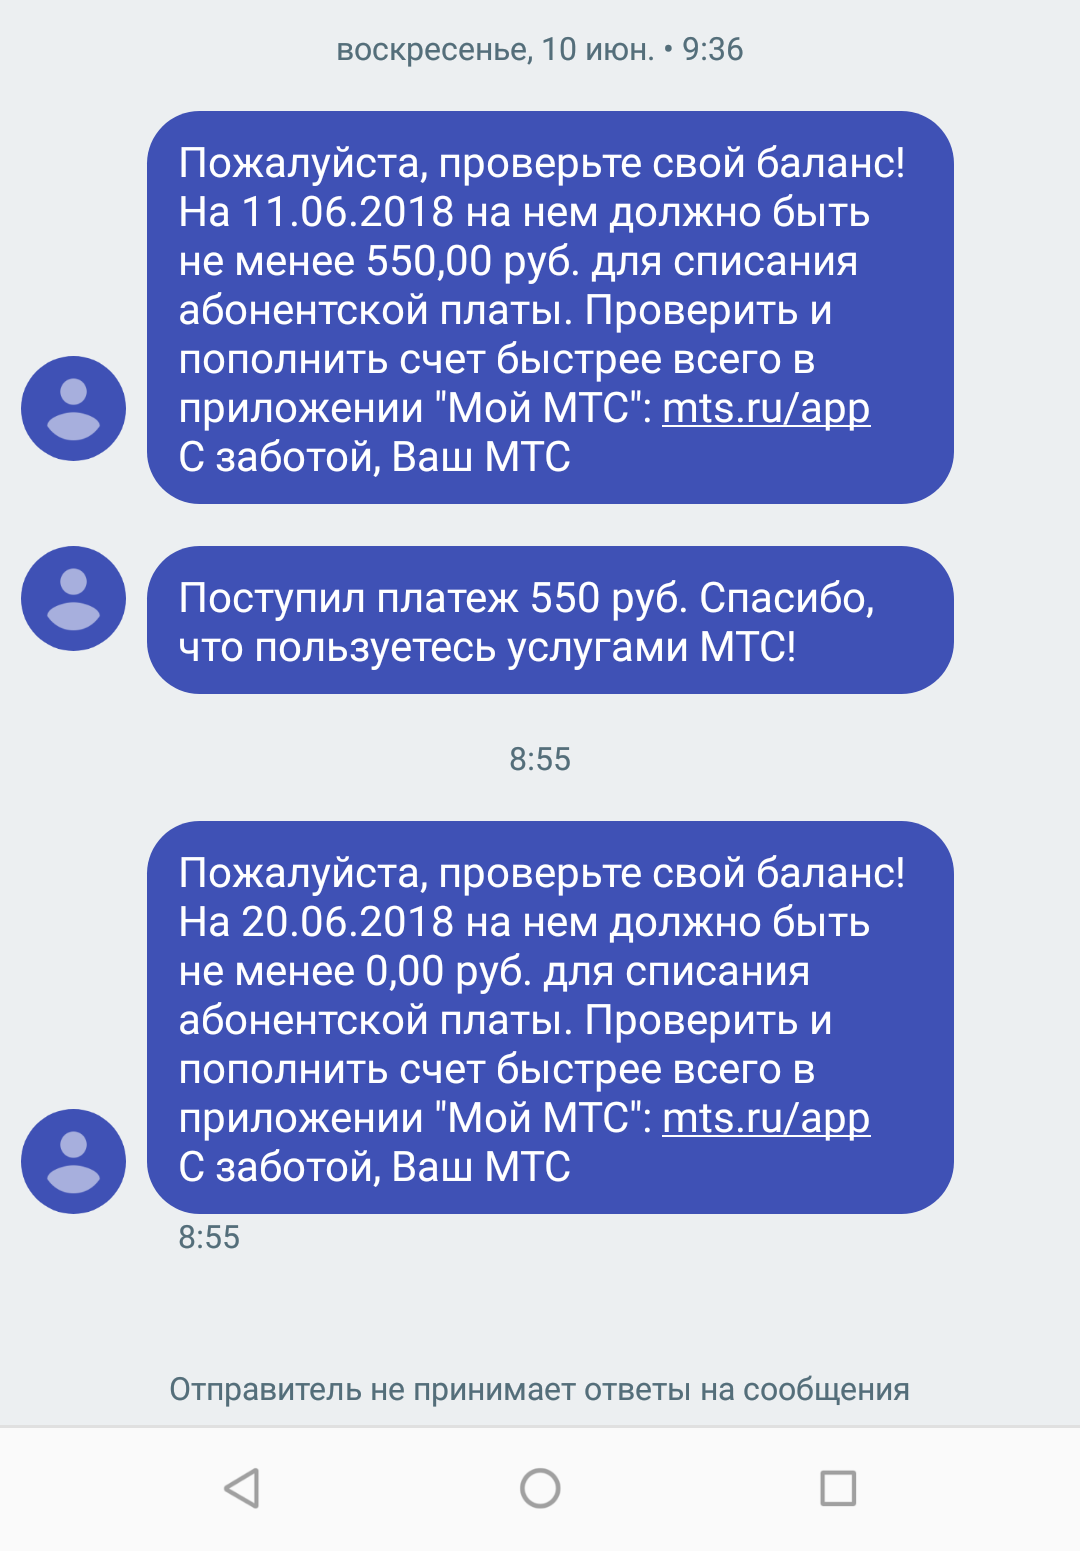 MTS, it was easy! - My, MTS, Balance, Oddities, SMS